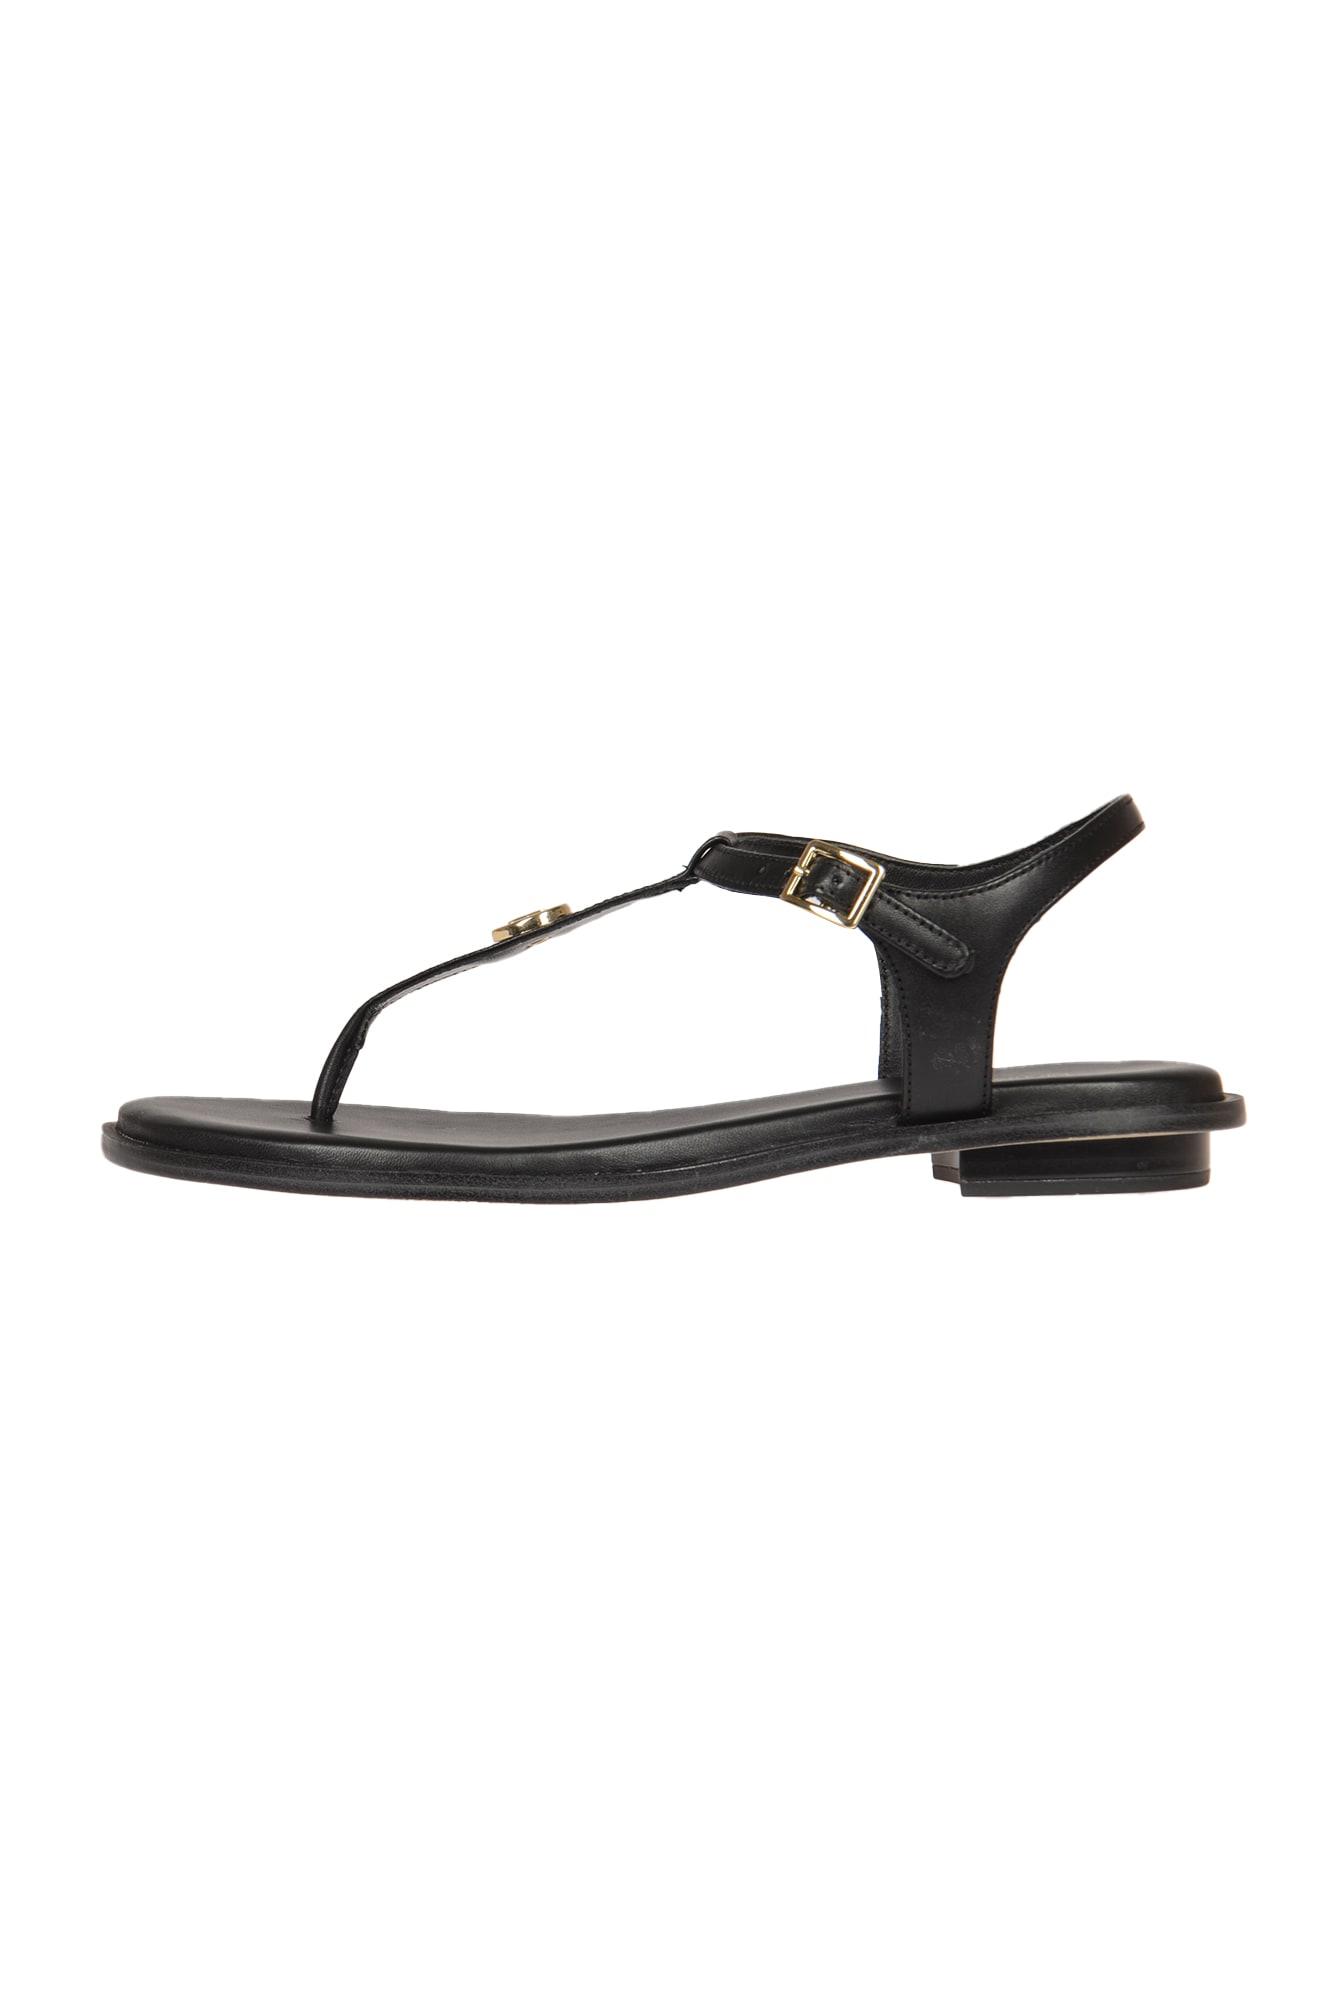 Michael Kors Mallory Thong Sandals in Black | Lyst